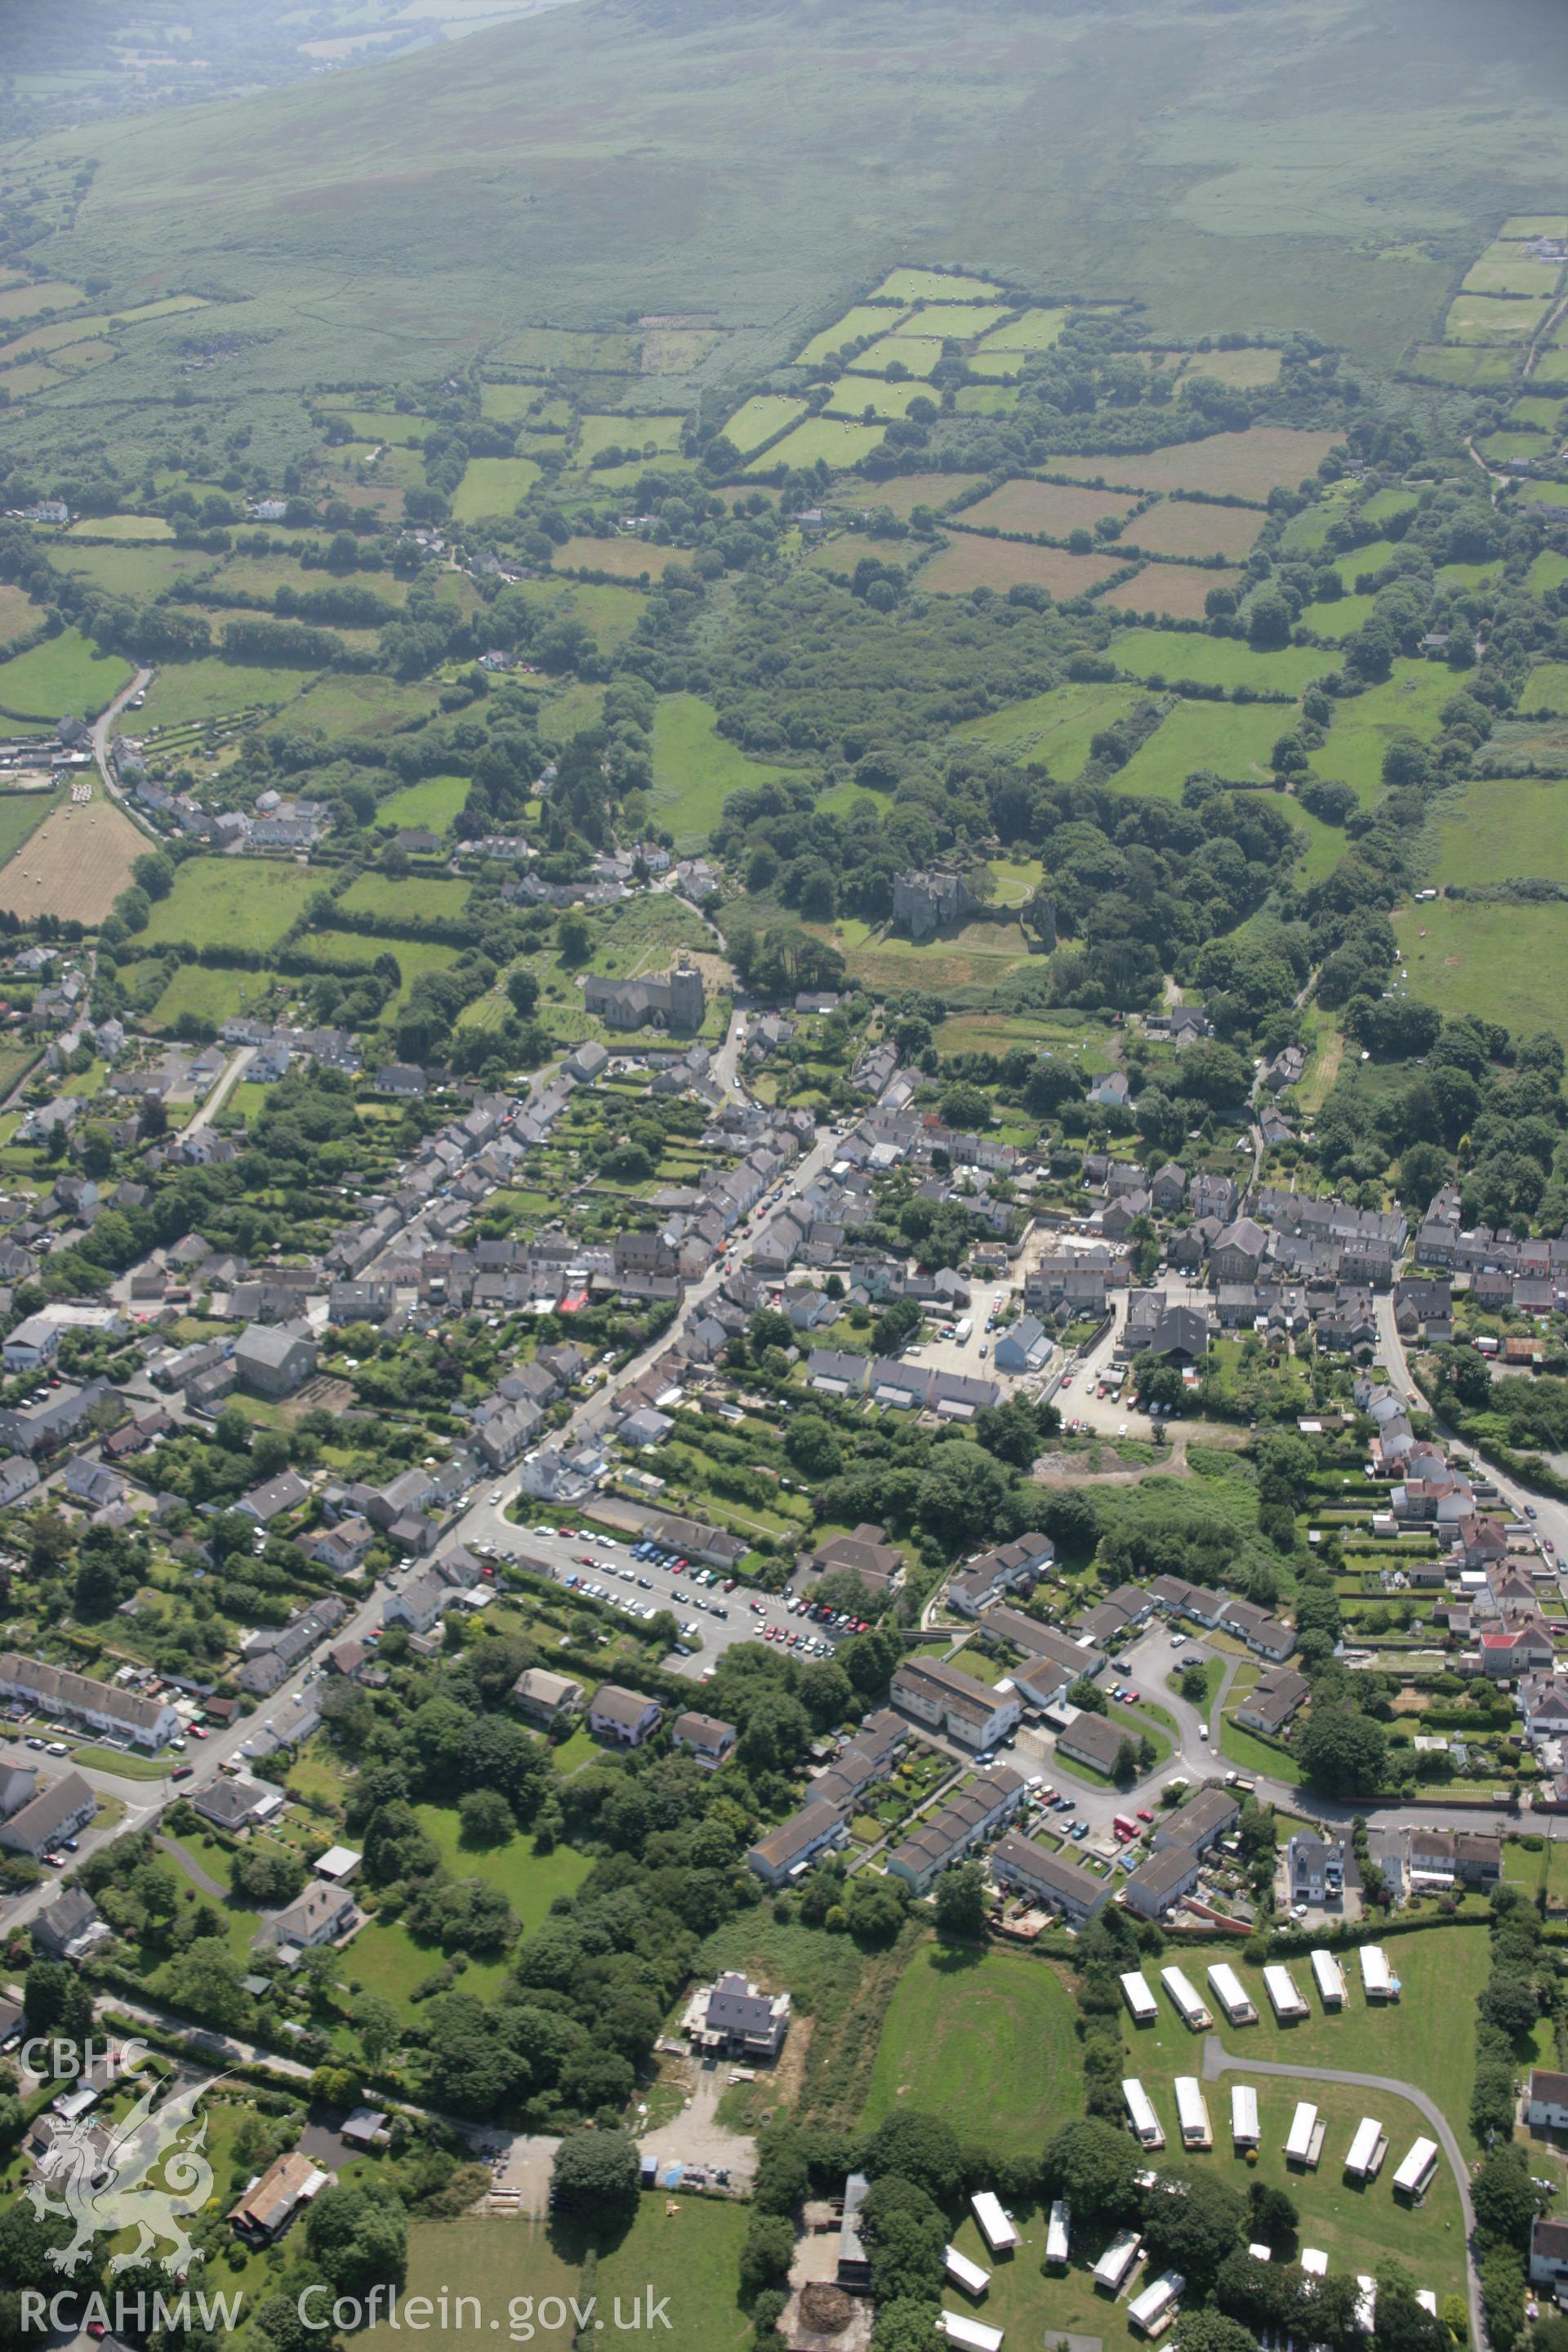 RCAHMW colour oblique aerial photograph of medieval borough of Newport, Pembrokeshire, in general view from the north-west. Taken on 11 July 2005 by Toby Driver